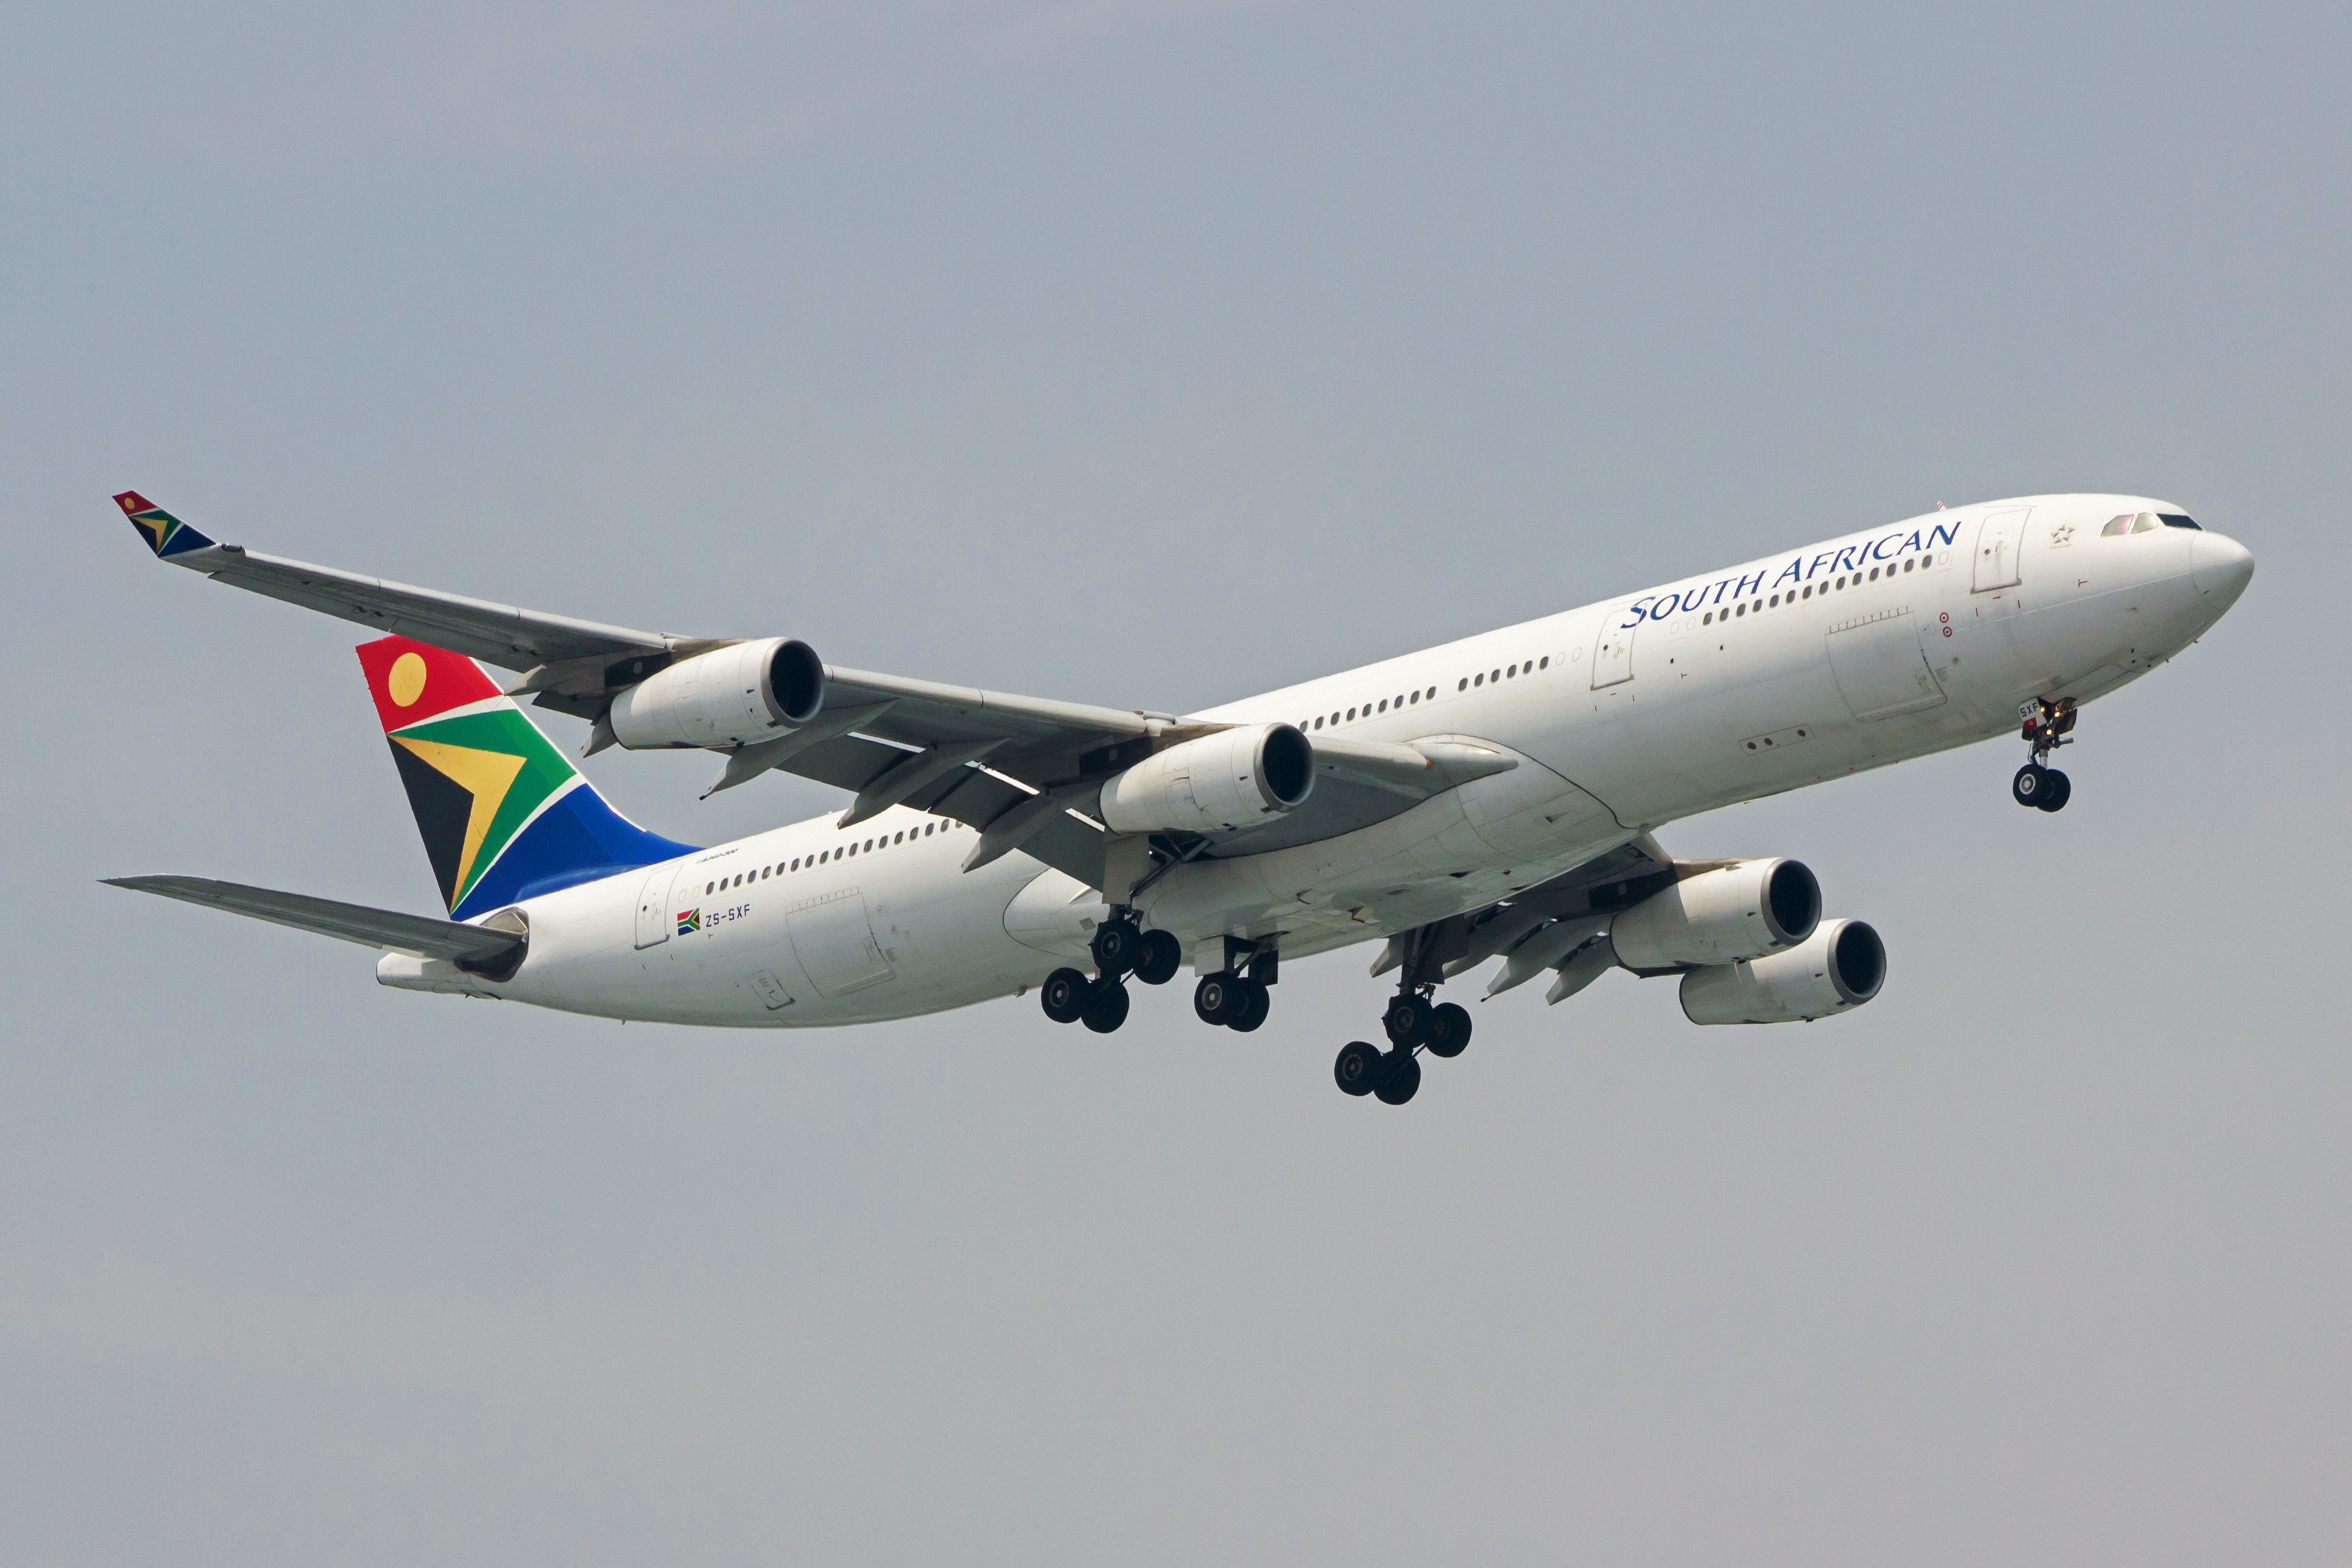 South African Airways A340-300 landing